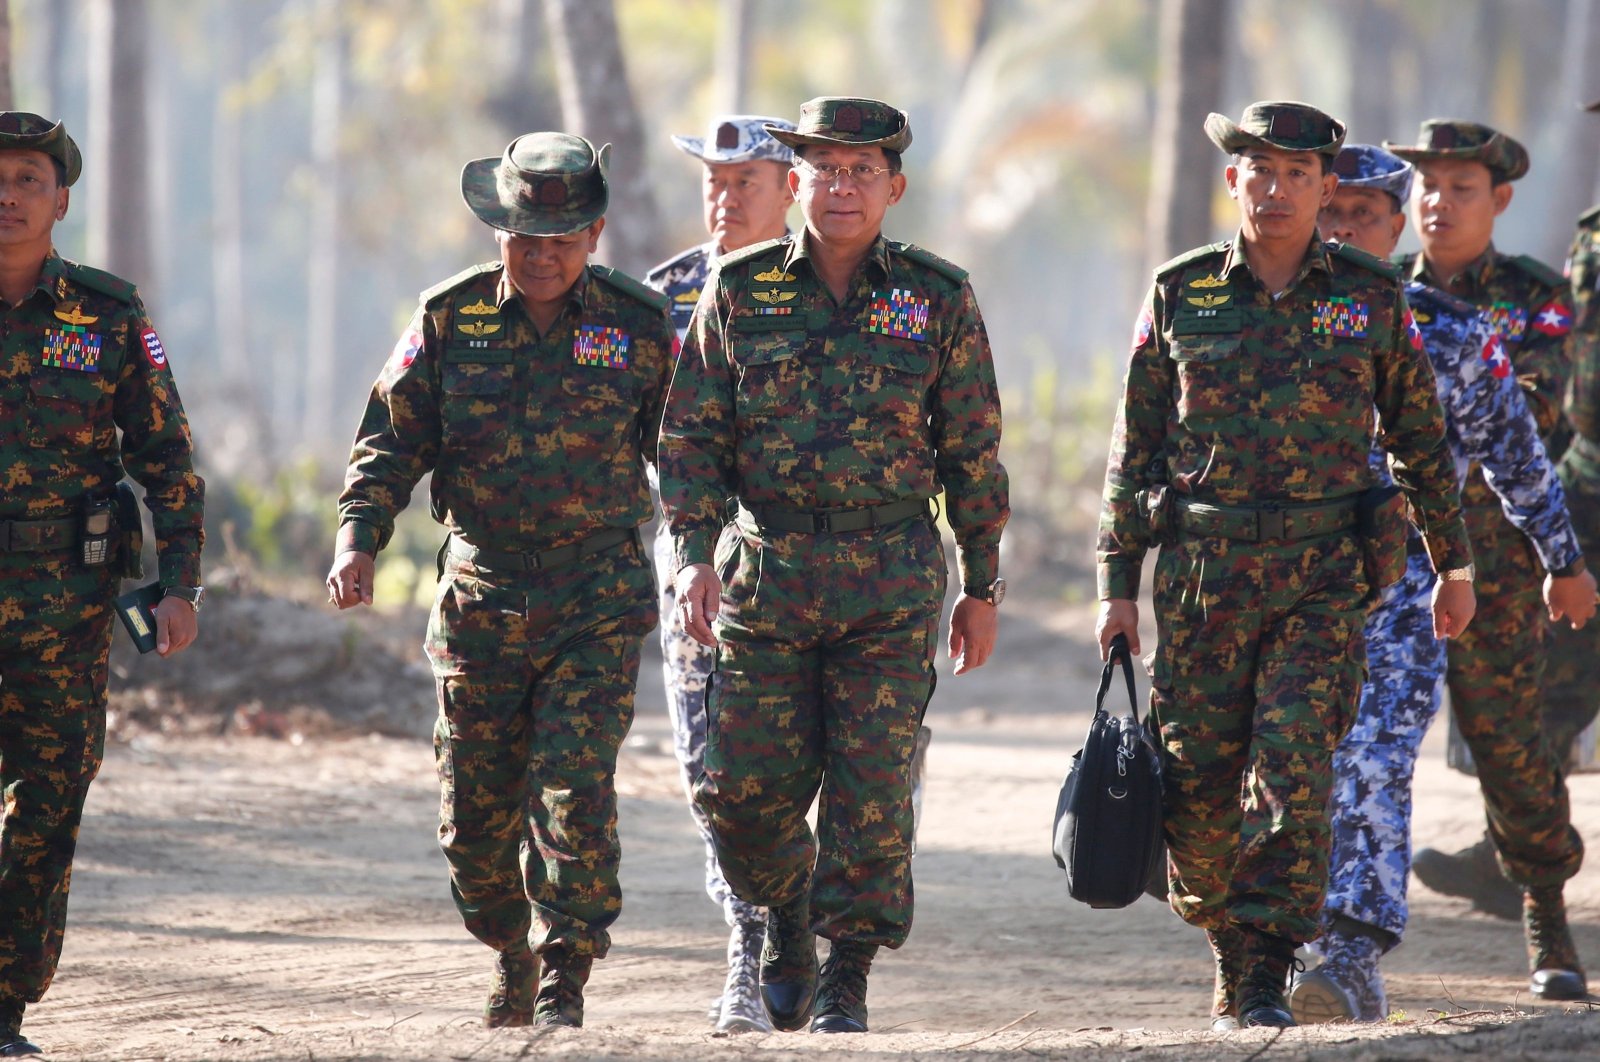 Myanmar military Commander-in-Chief Min Aung Hlaing (4L) and senior military commanders arrive on the second day of the 'Sin Phyu Shin' joint military exercises in the Irrawaddy Delta region, Feb. 3, 2018. (AFP Photo)